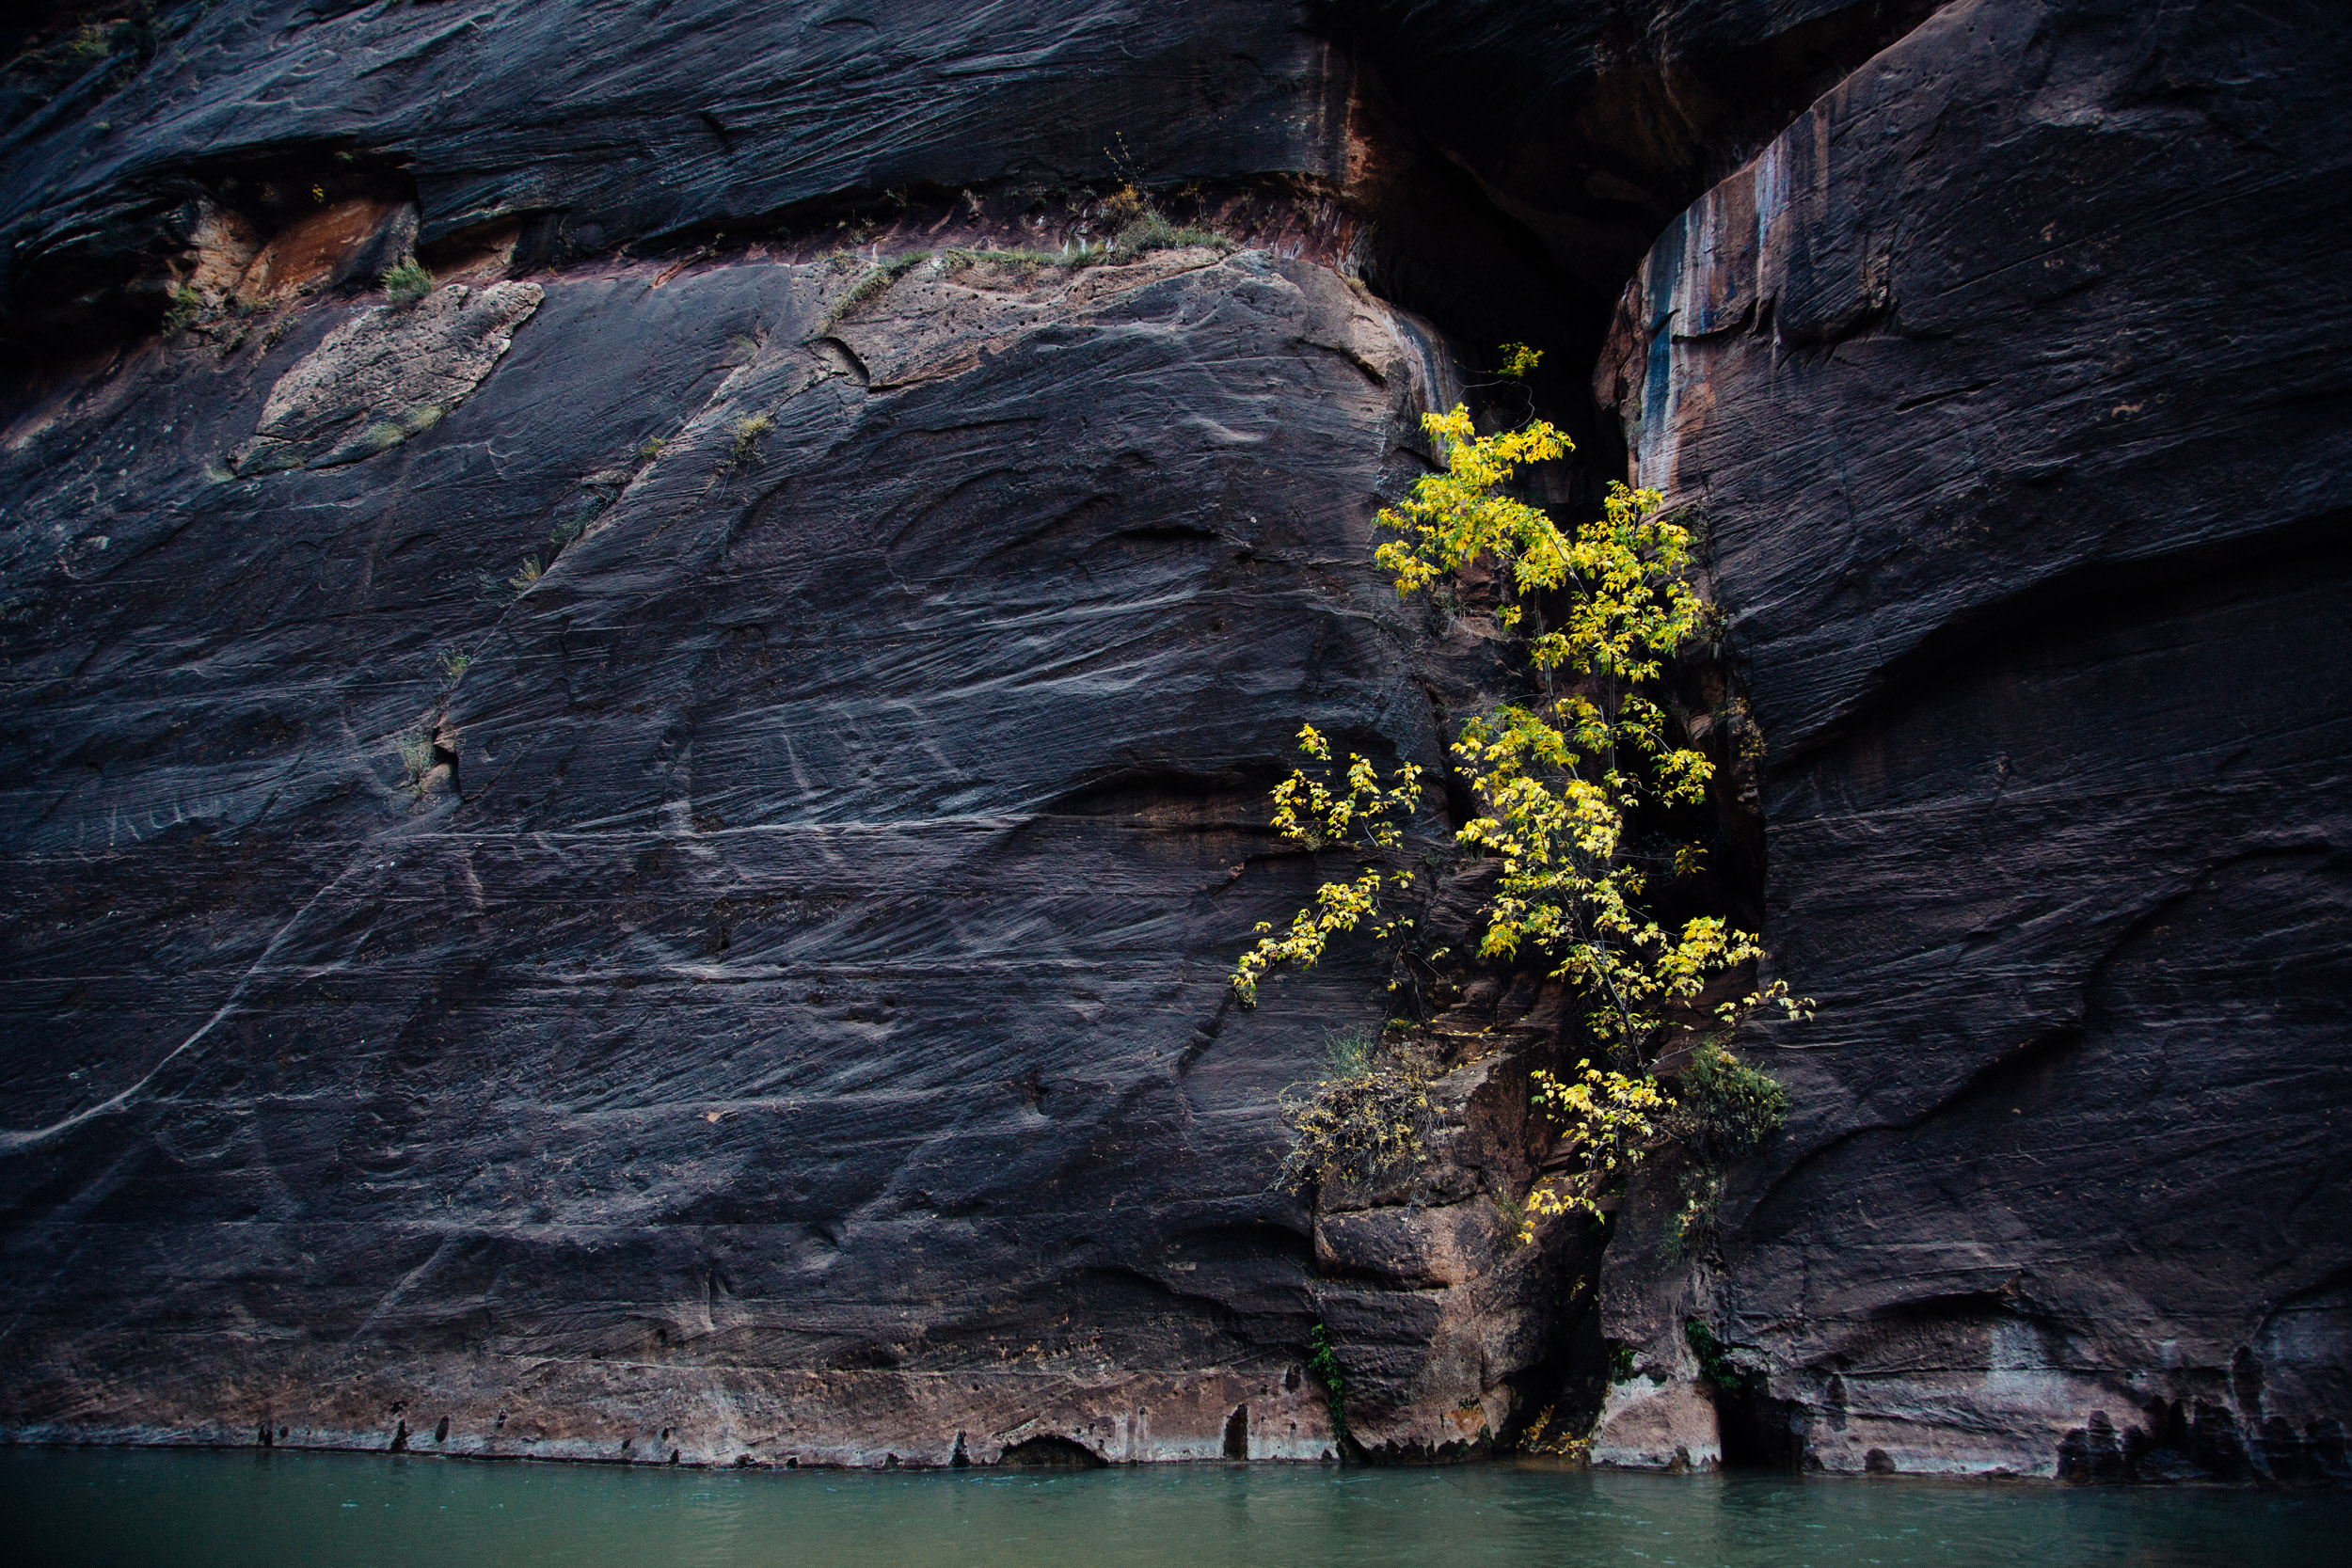 Fall colors jut out to put on a display in the Narrows in Zion Canyon